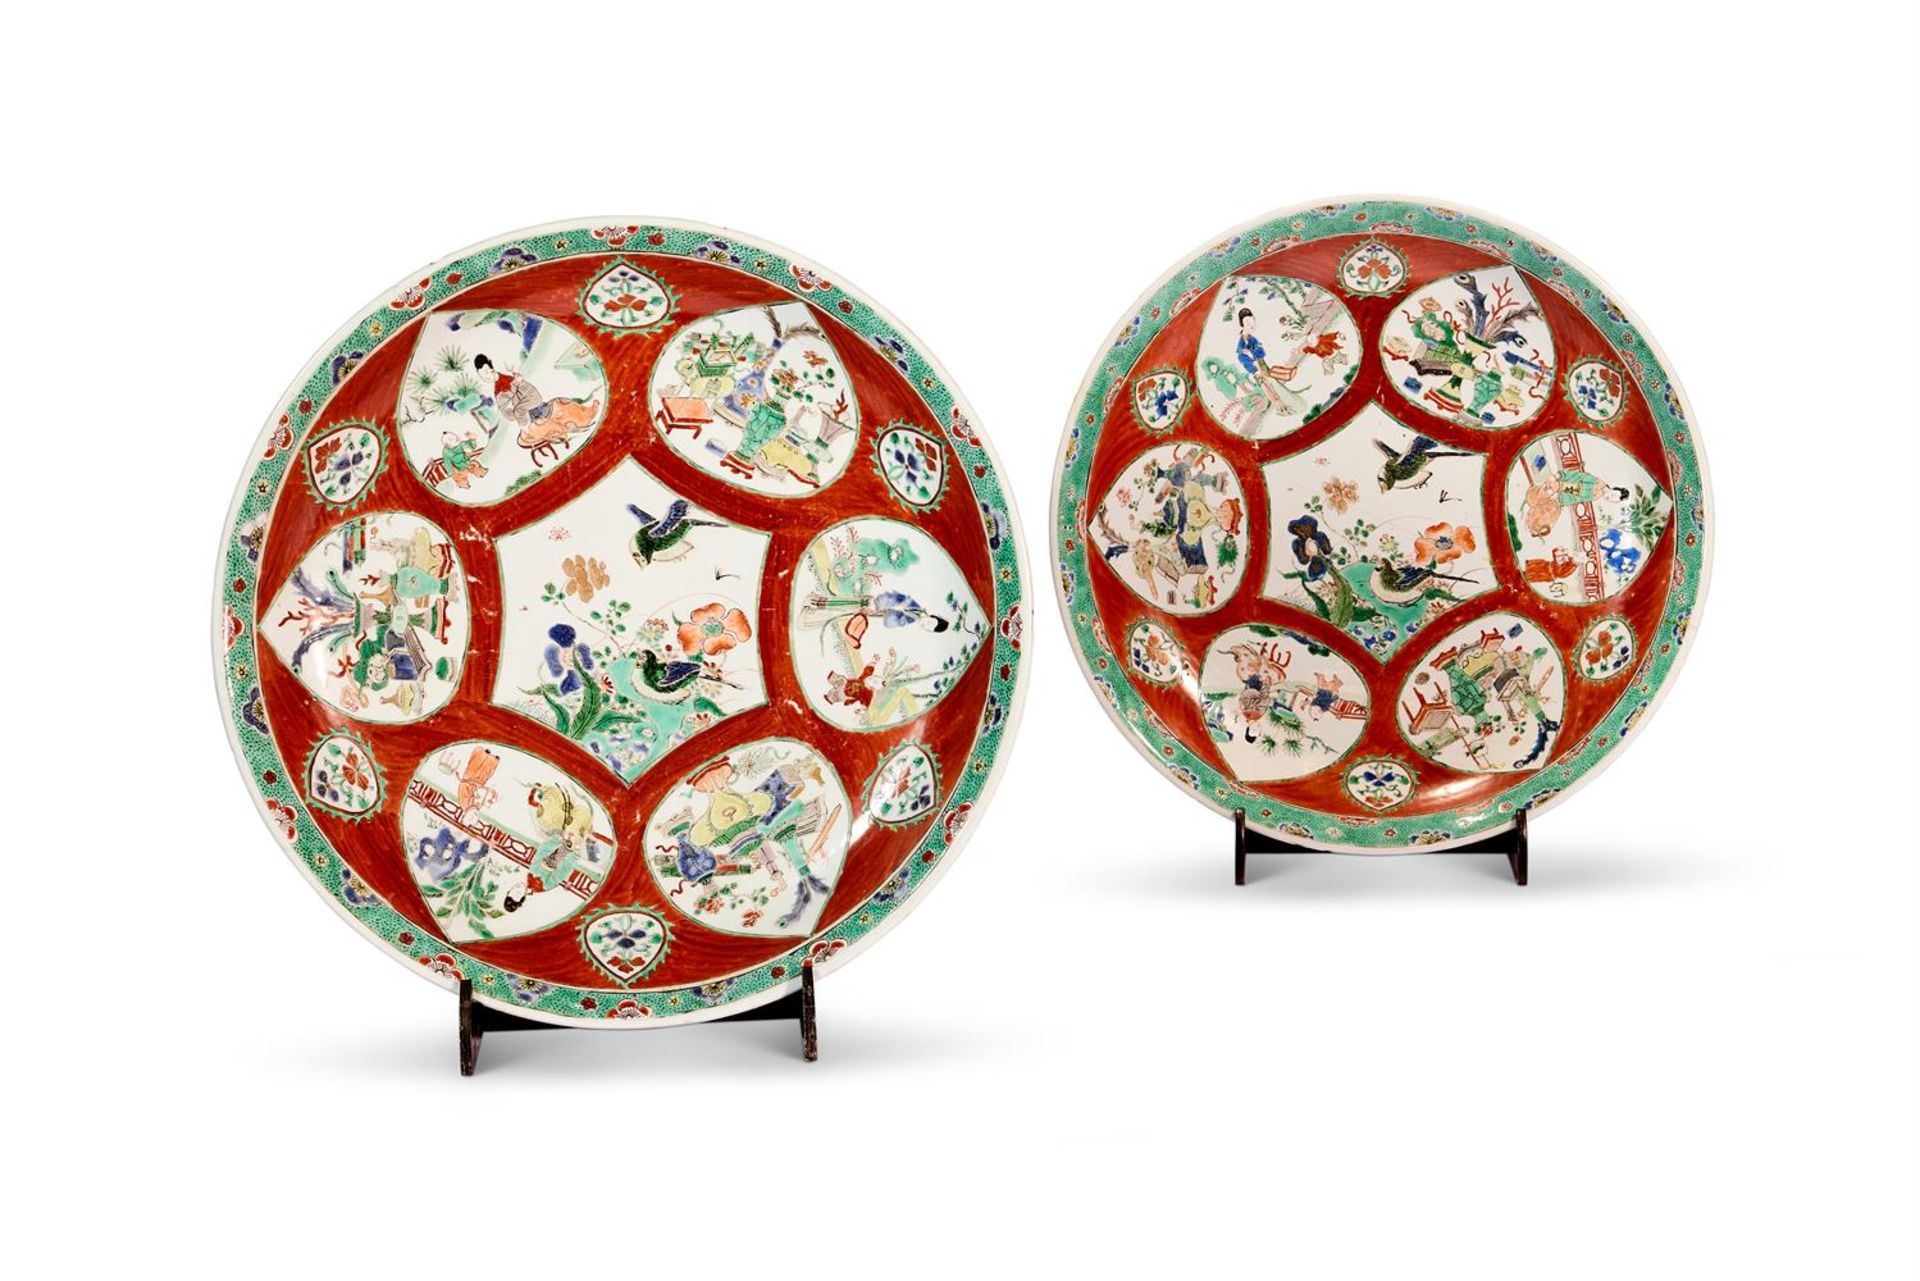 A LARGE PAIR OF CHINESE FAMILLE VERTE CORAL-GROUND DISHES, QING DYNASTY